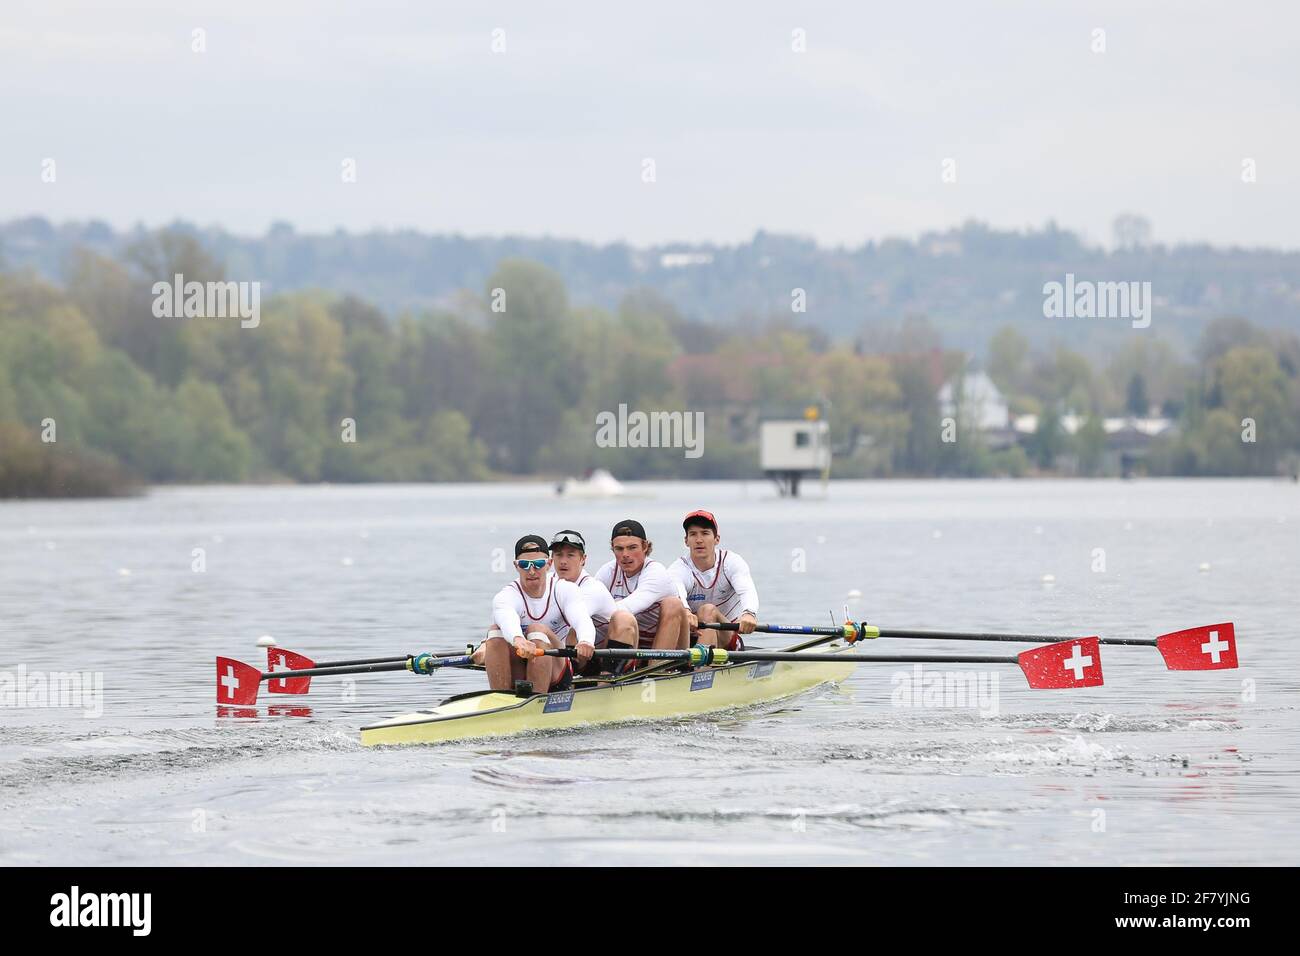 Varese, Italy. 10th Apr, 2021. Markus Kessler, Paul Jacquot, Joel Schuerch and Andrin Gulich of Switzerland compete in the Men's Four Semifinal A/B 1 on Day 2 at the European Rowing Championships in Lake Varese on April 10th 2021 in Varese, Italy Credit: Mickael Chavet/Alamy Live News Stock Photo